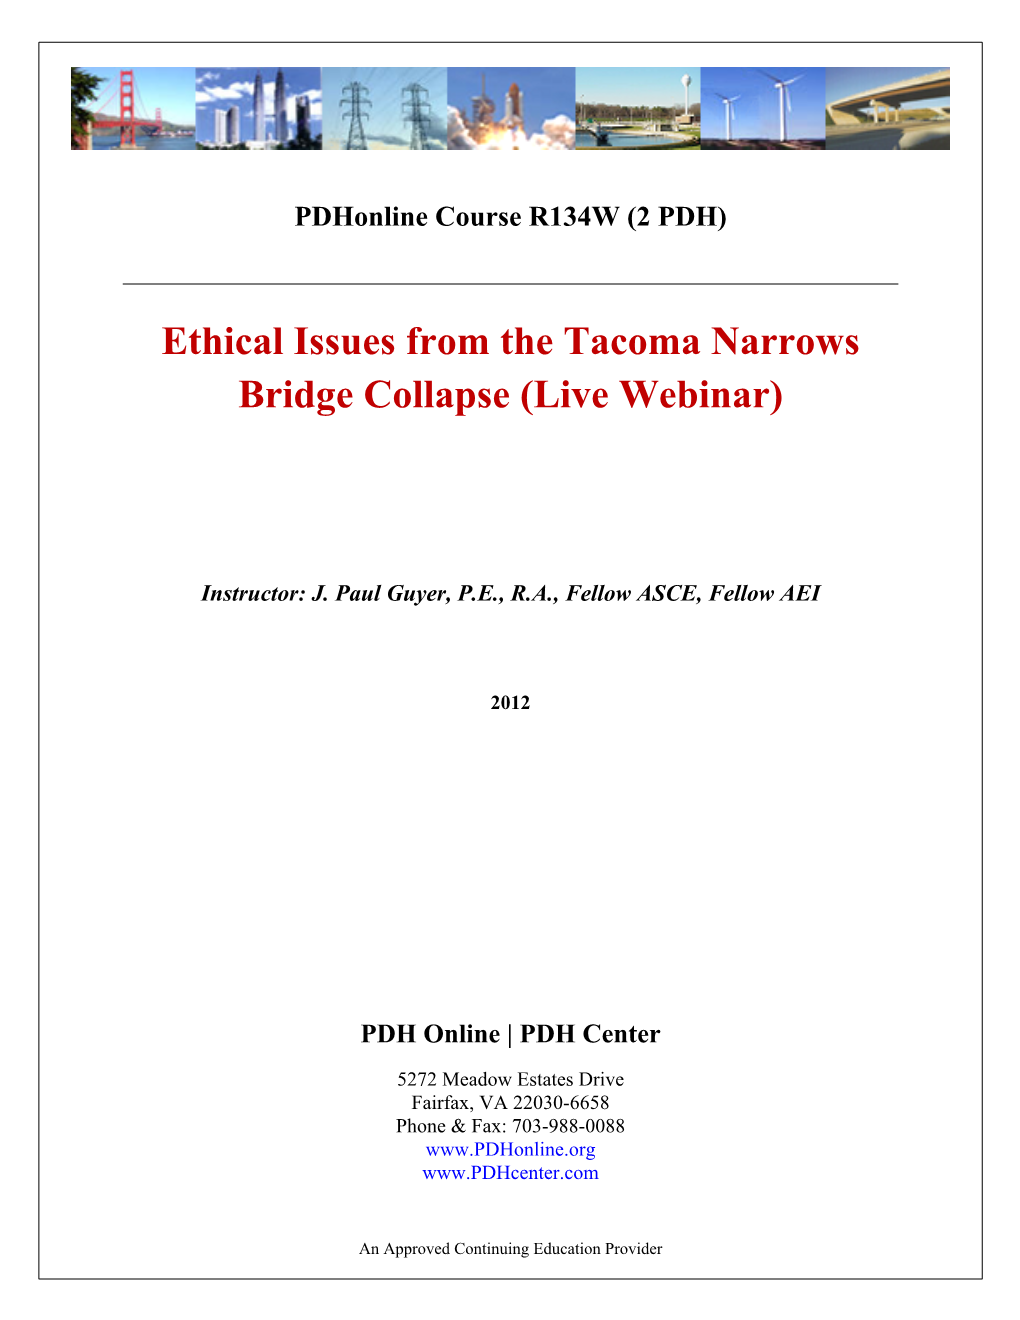 Ethical Issues from the Tacoma Narrows Bridge Collapse (Live Webinar)